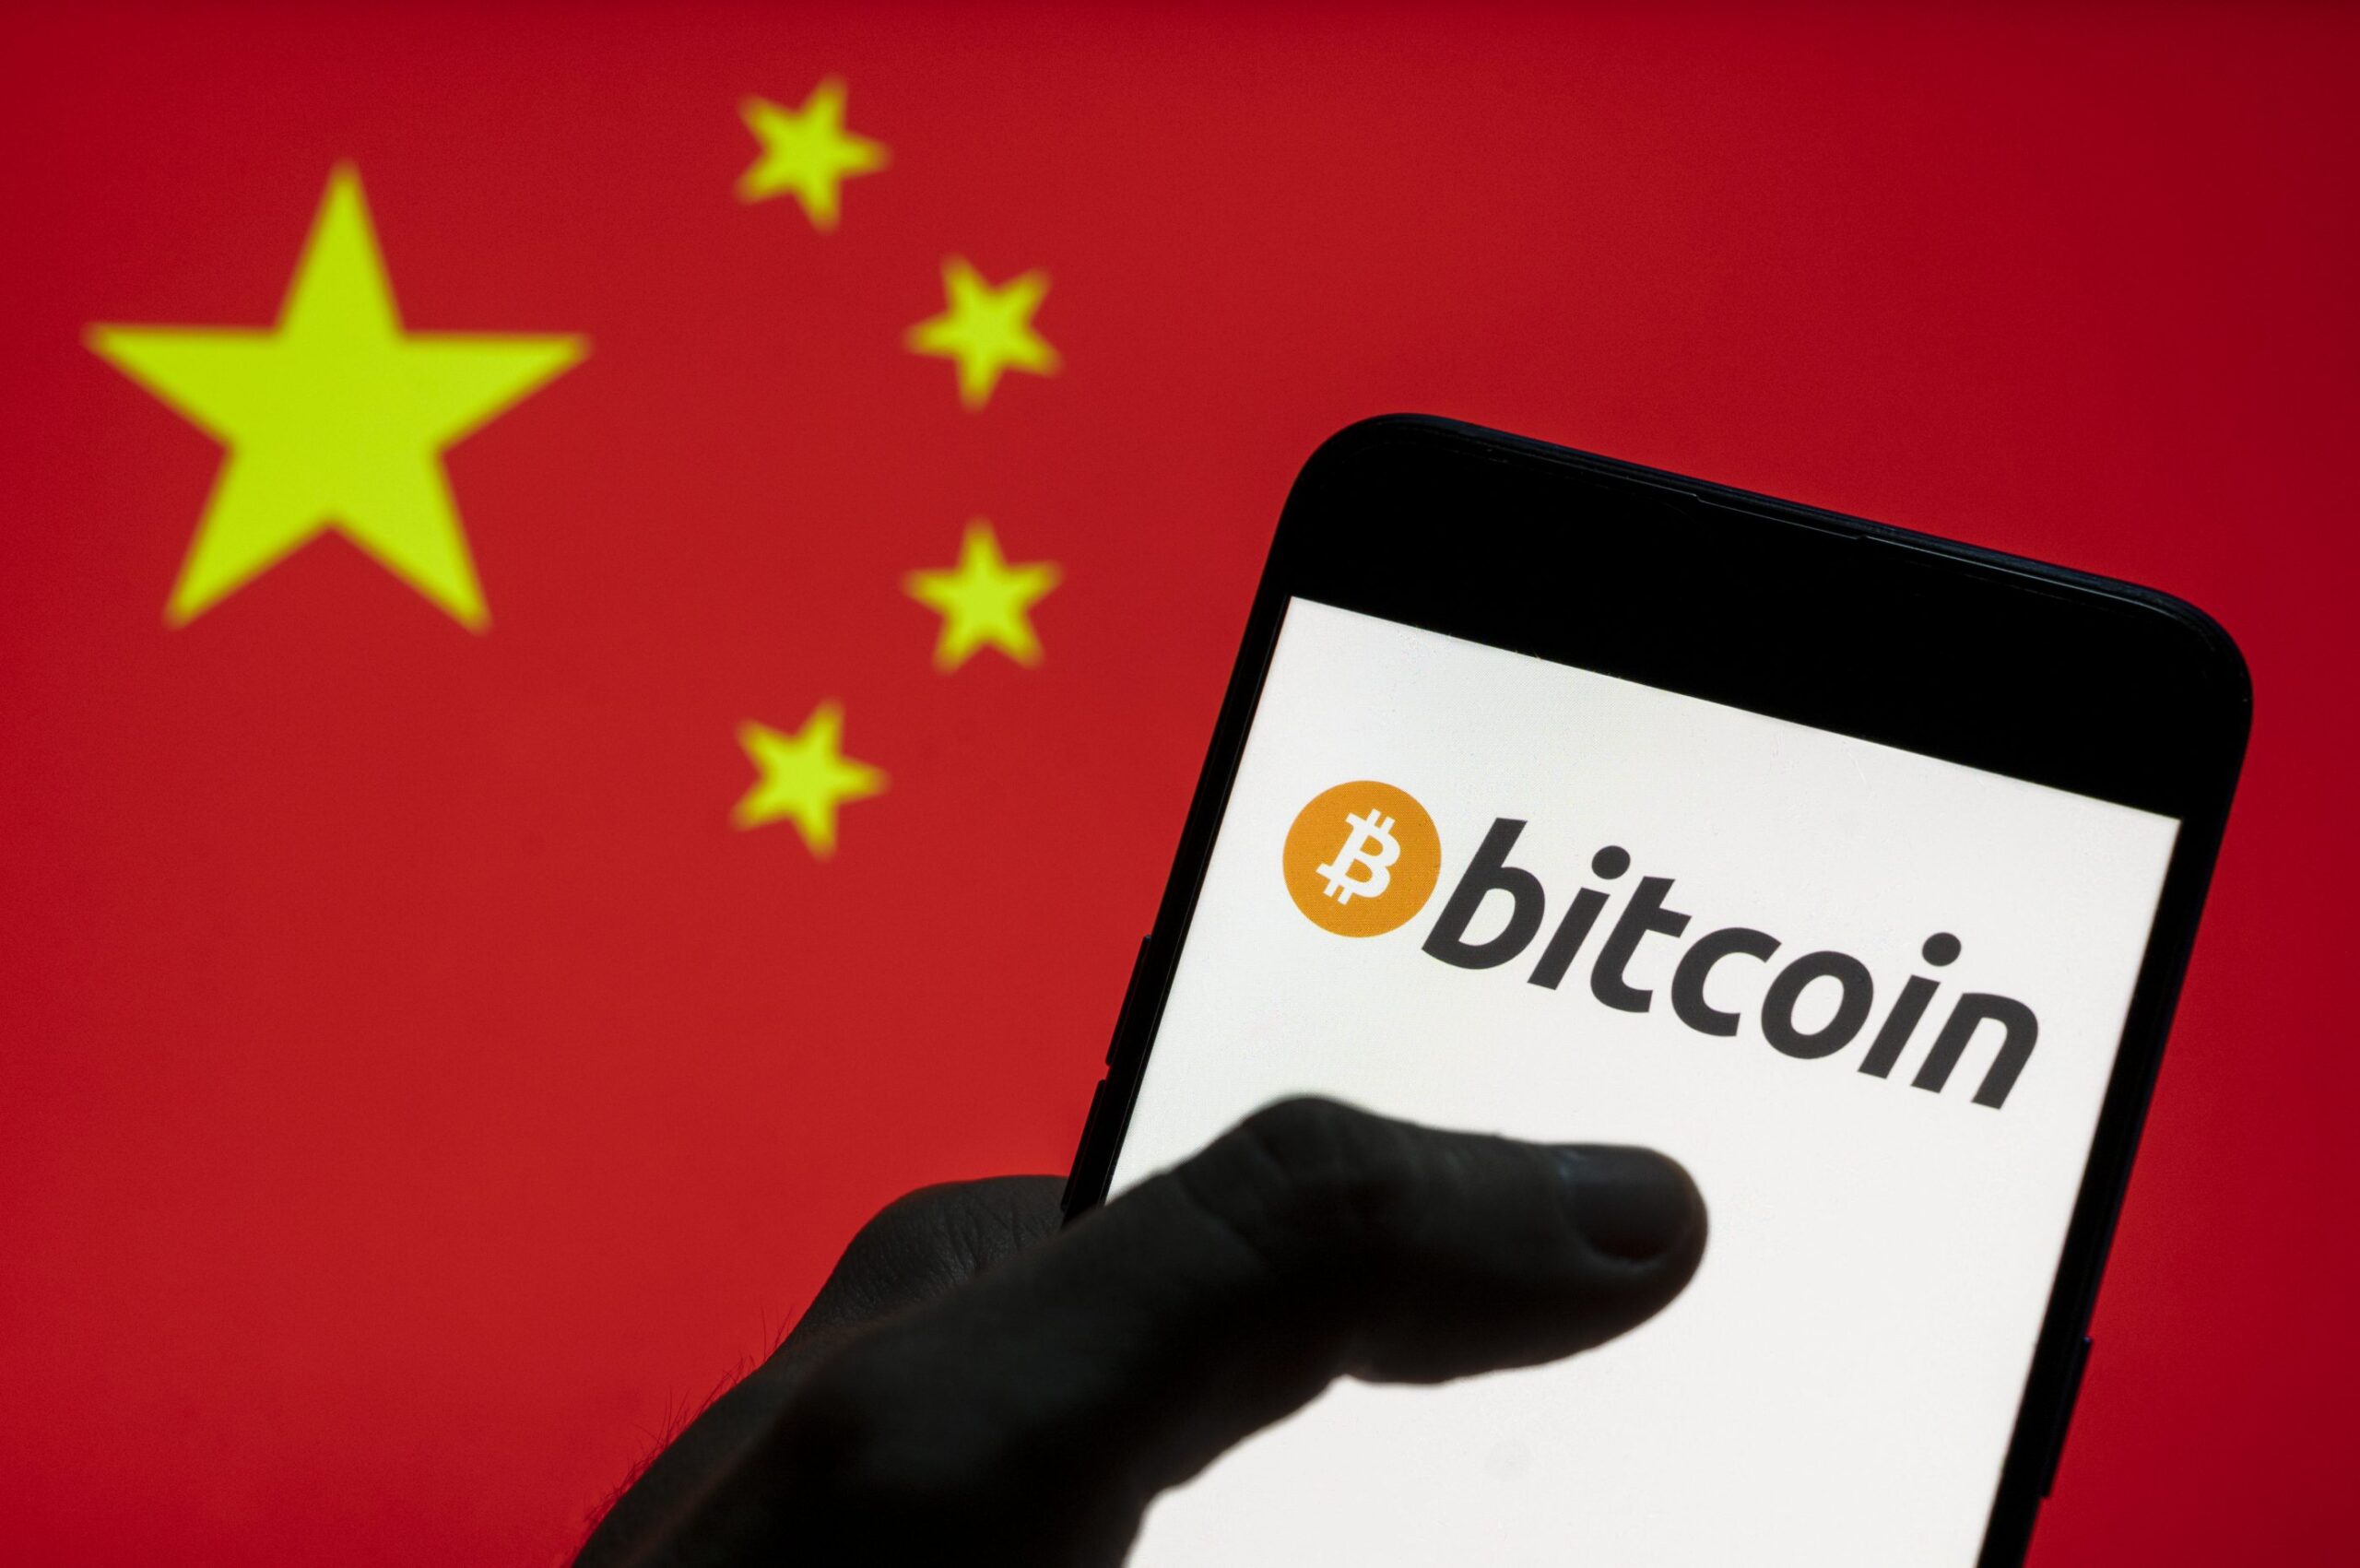 Deribit and OKX getting Chinese crypto trader customers Amid Ban 5